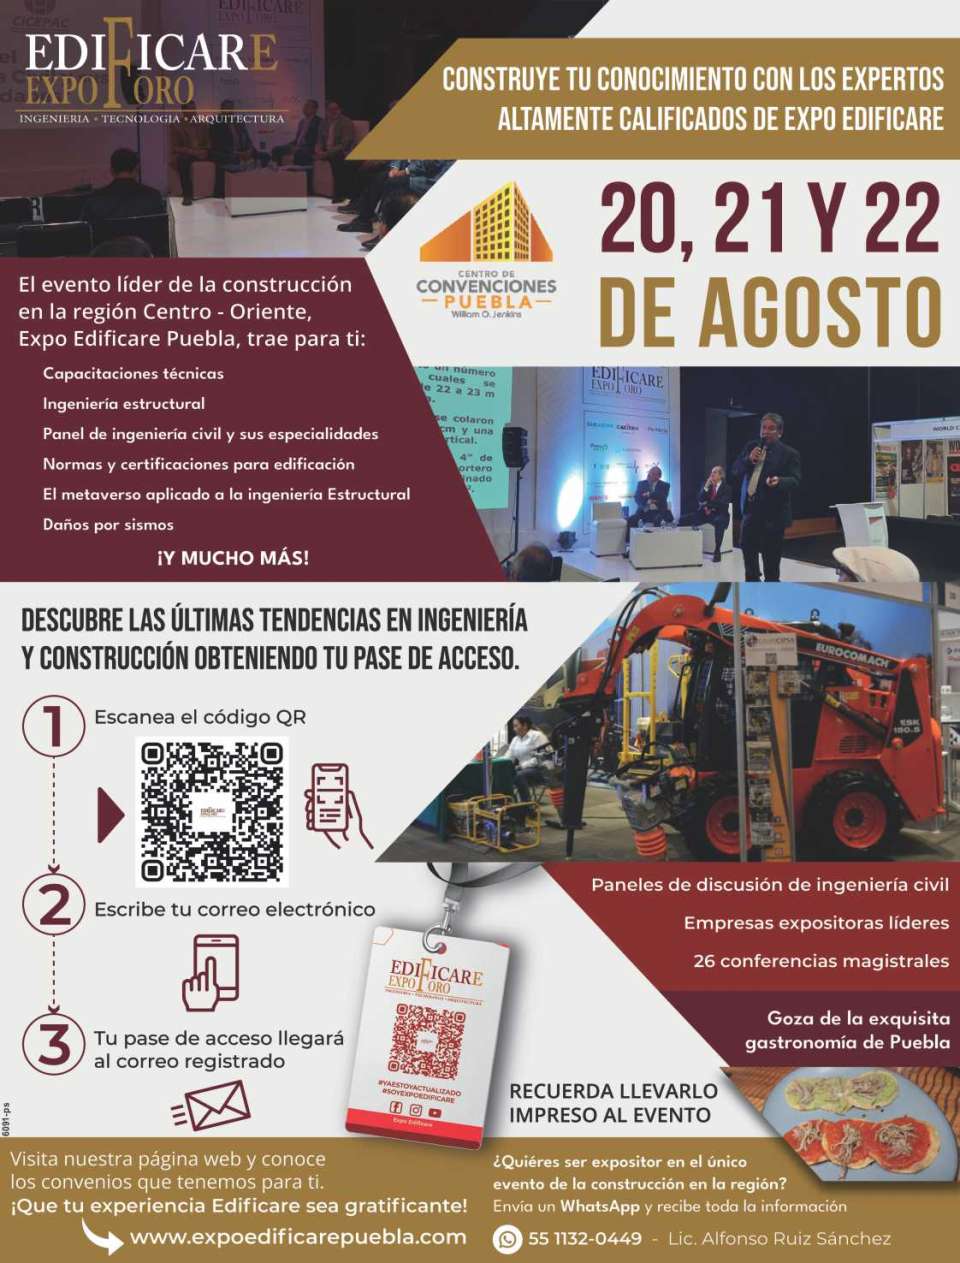 Edificare Forum Expo 2024 Puebla. Leading event in the Central-Eastern region of Mexico, from August 20 to 22, 2024 at the William O. Jenkins Convention Center in the City of Puebla.